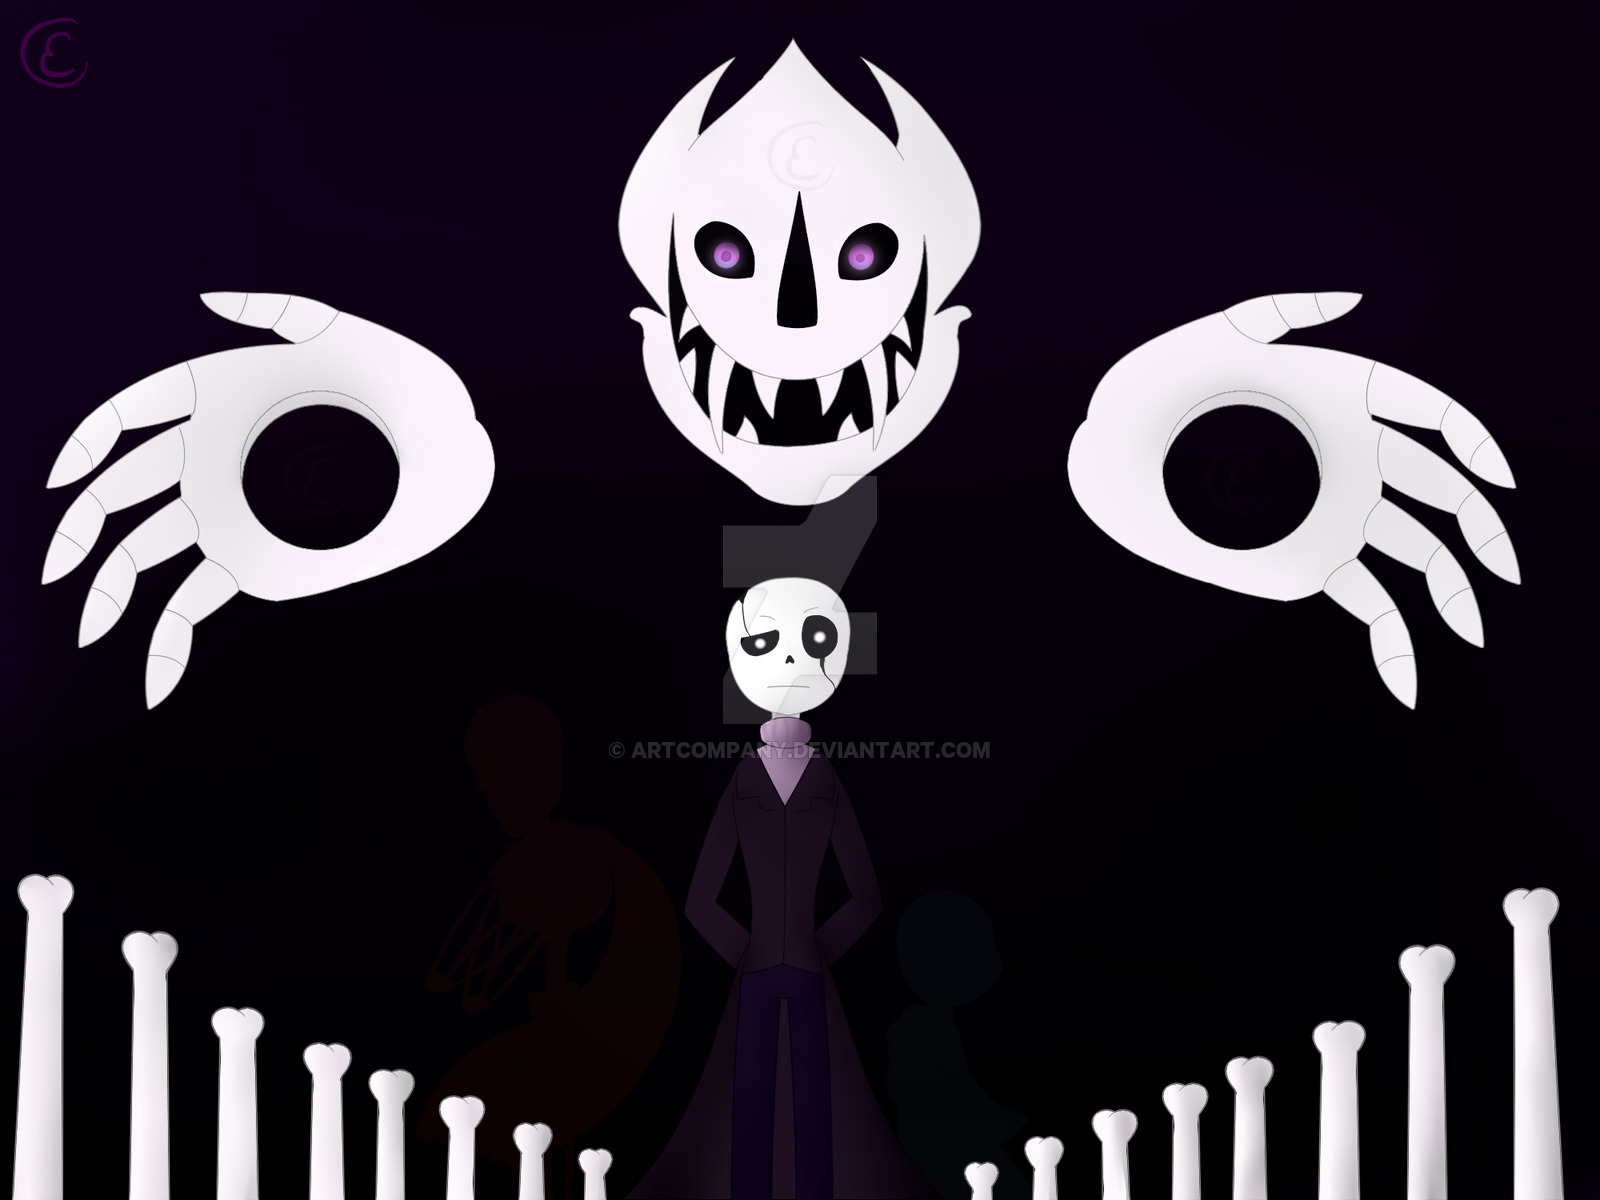 Undertale Wallpaper cho Android - Tải về